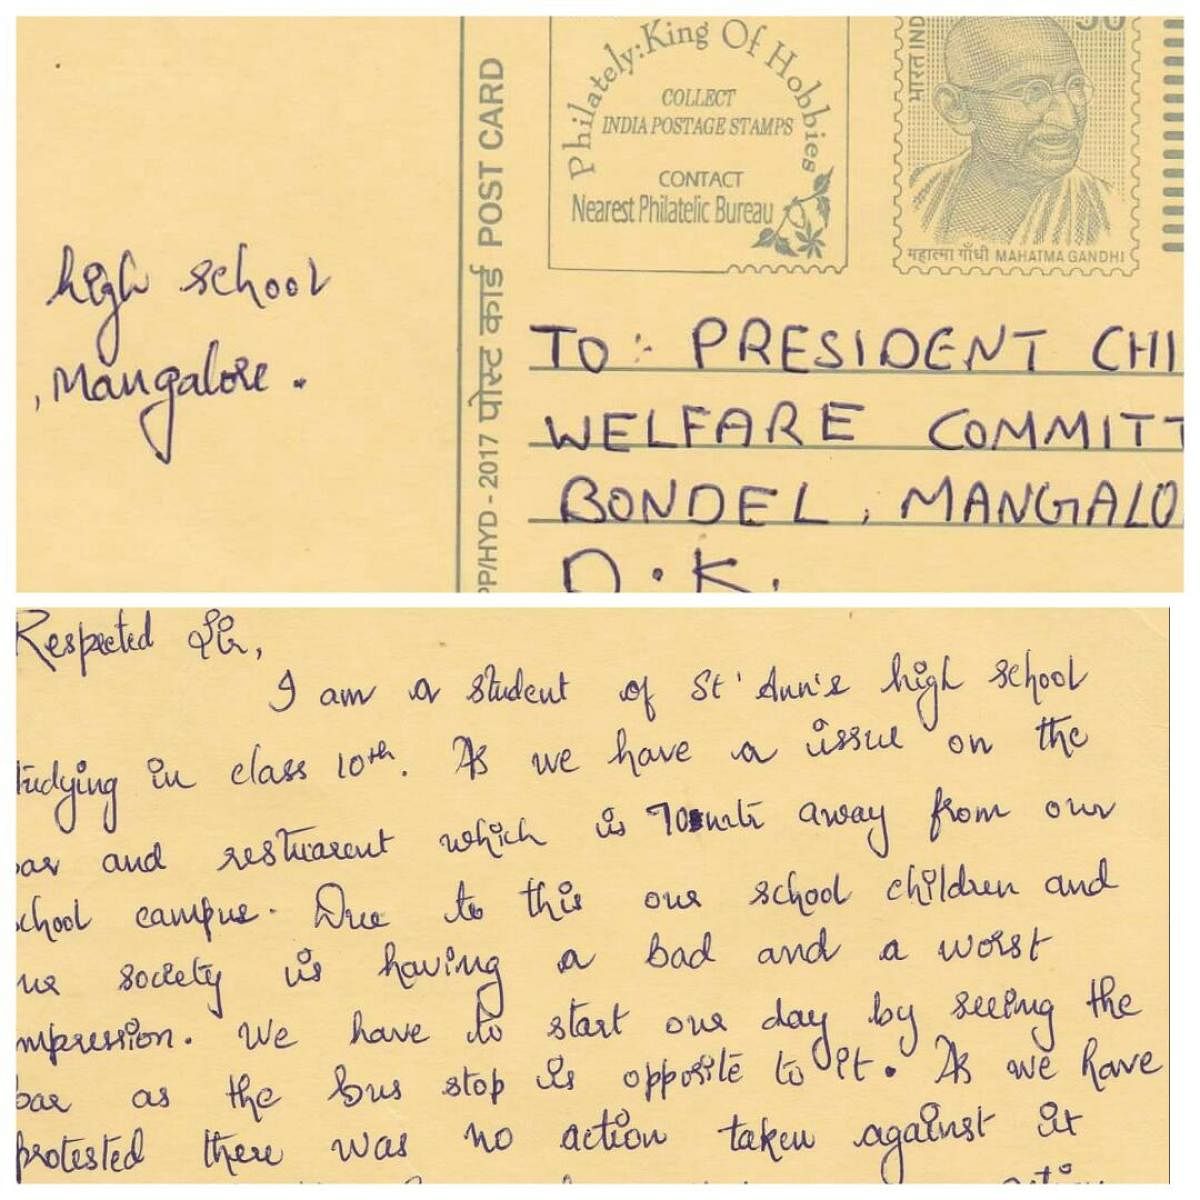 Post card written by a student to DK CWC President